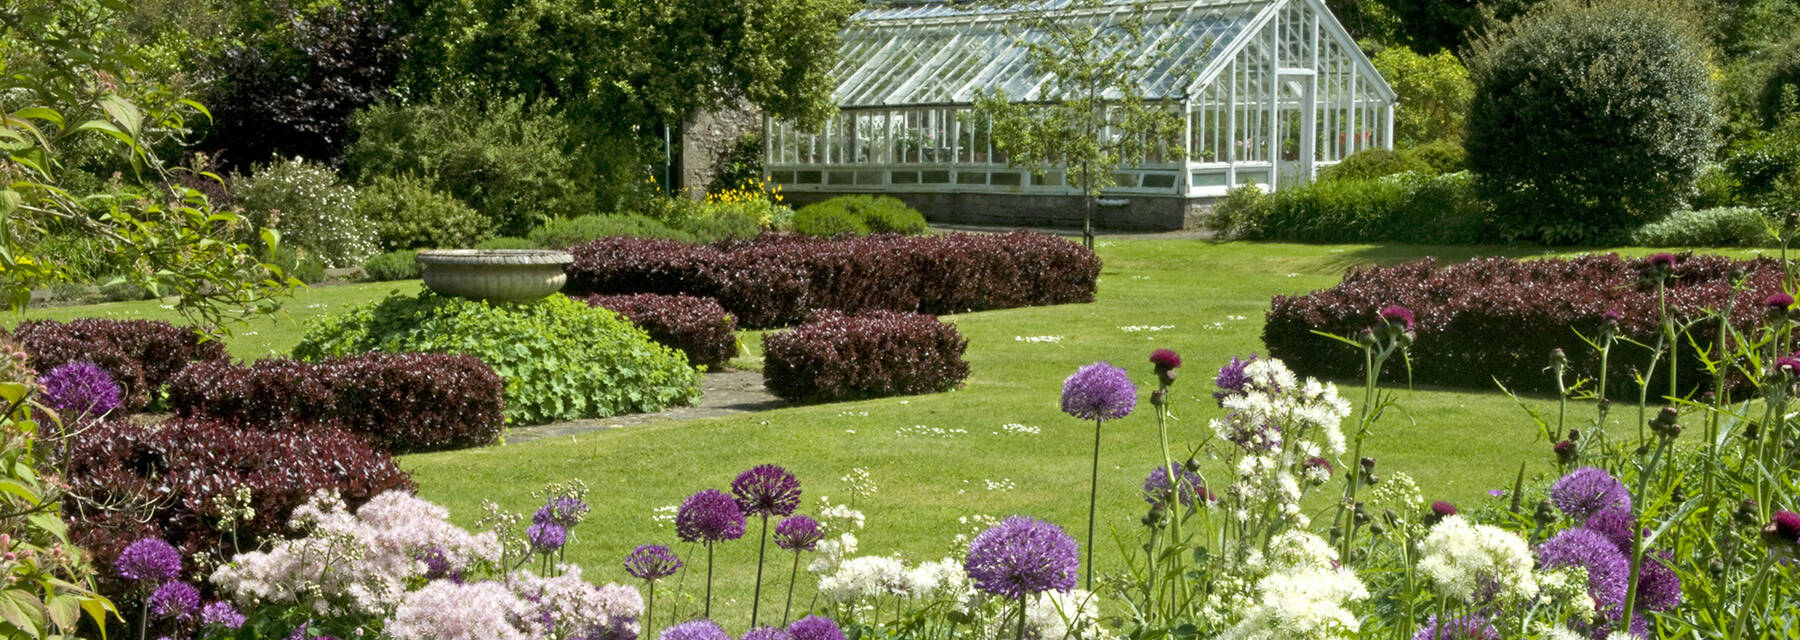 Purple alliums and white flowers stand in front of the Malleny Garden landscape, with the glasshouse seen in the background.